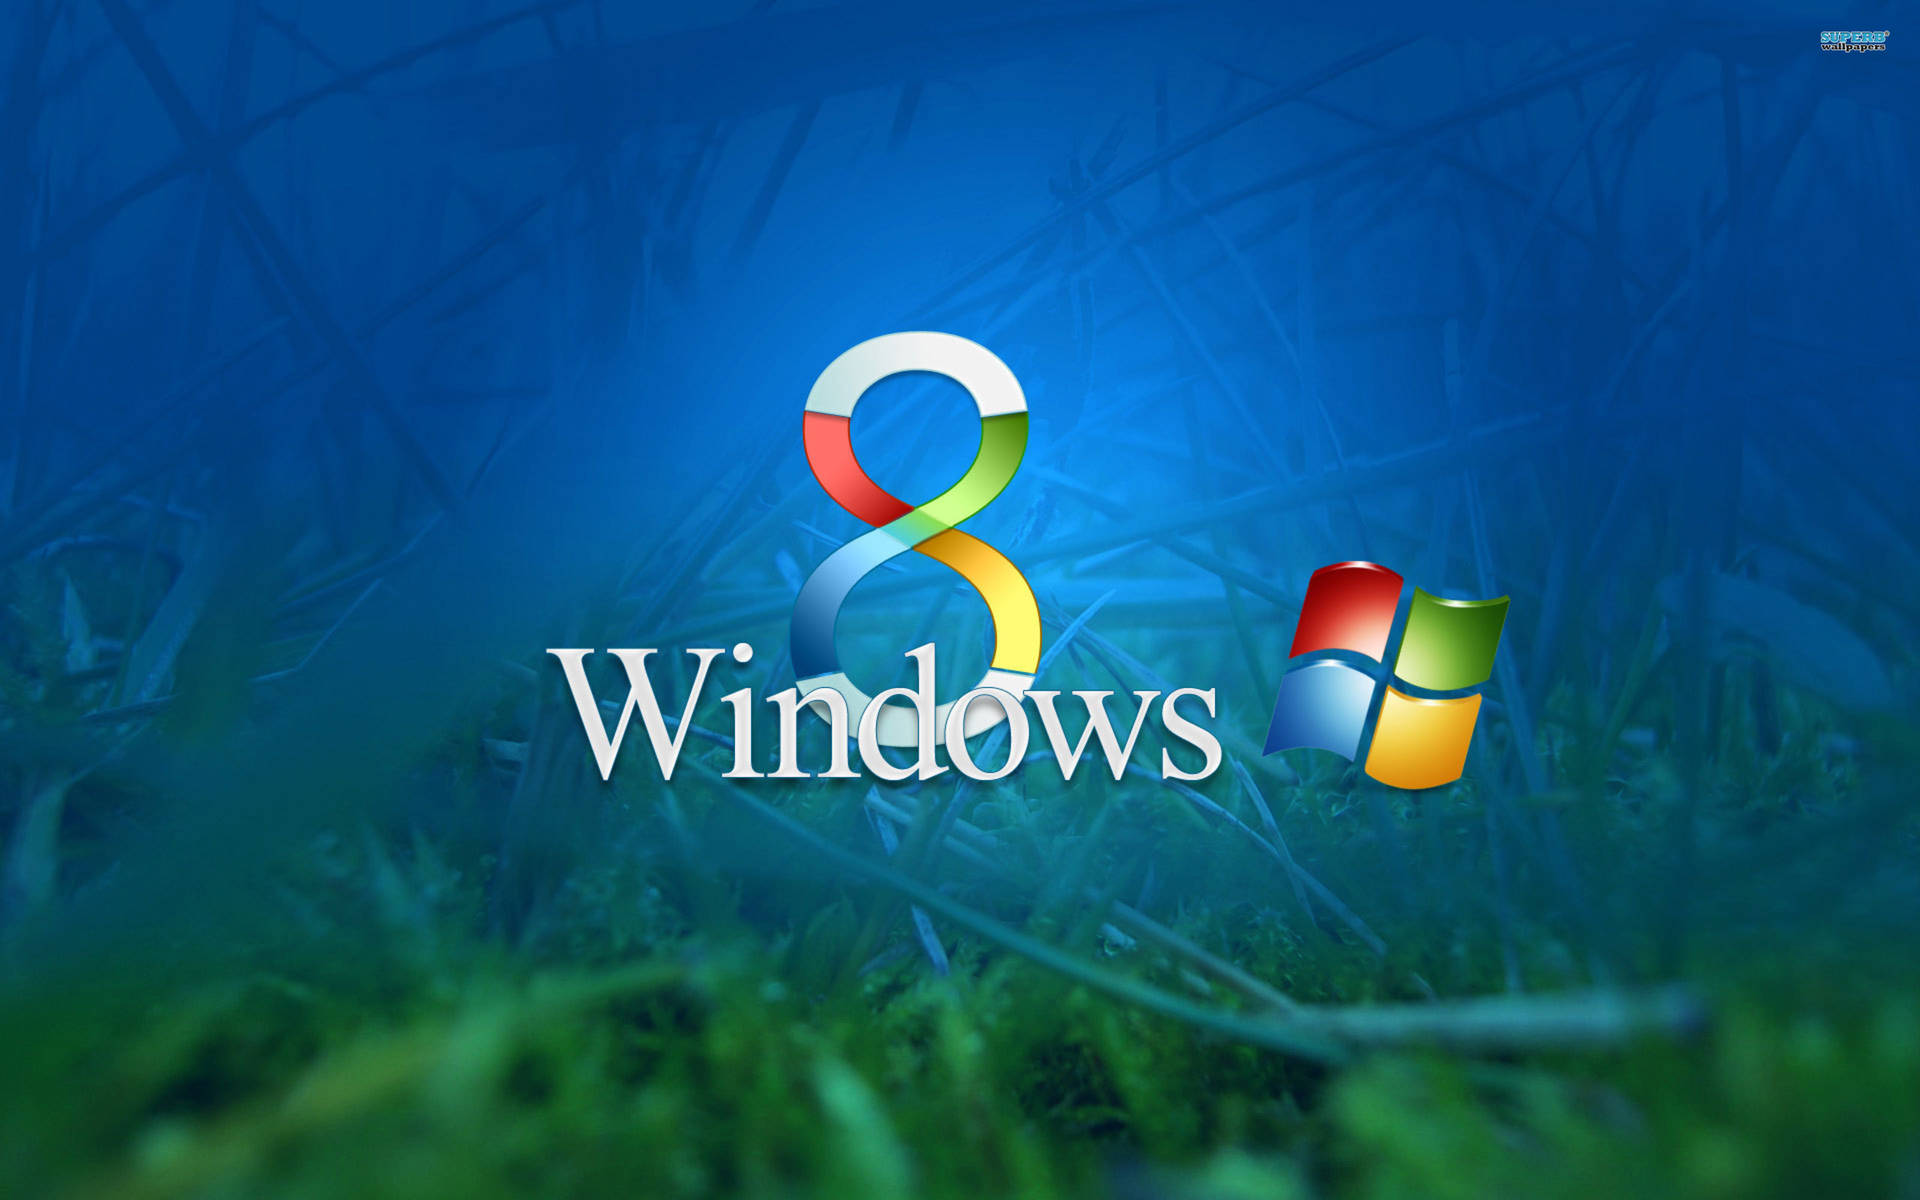 Windows 8 Grassy And Blue Background Background